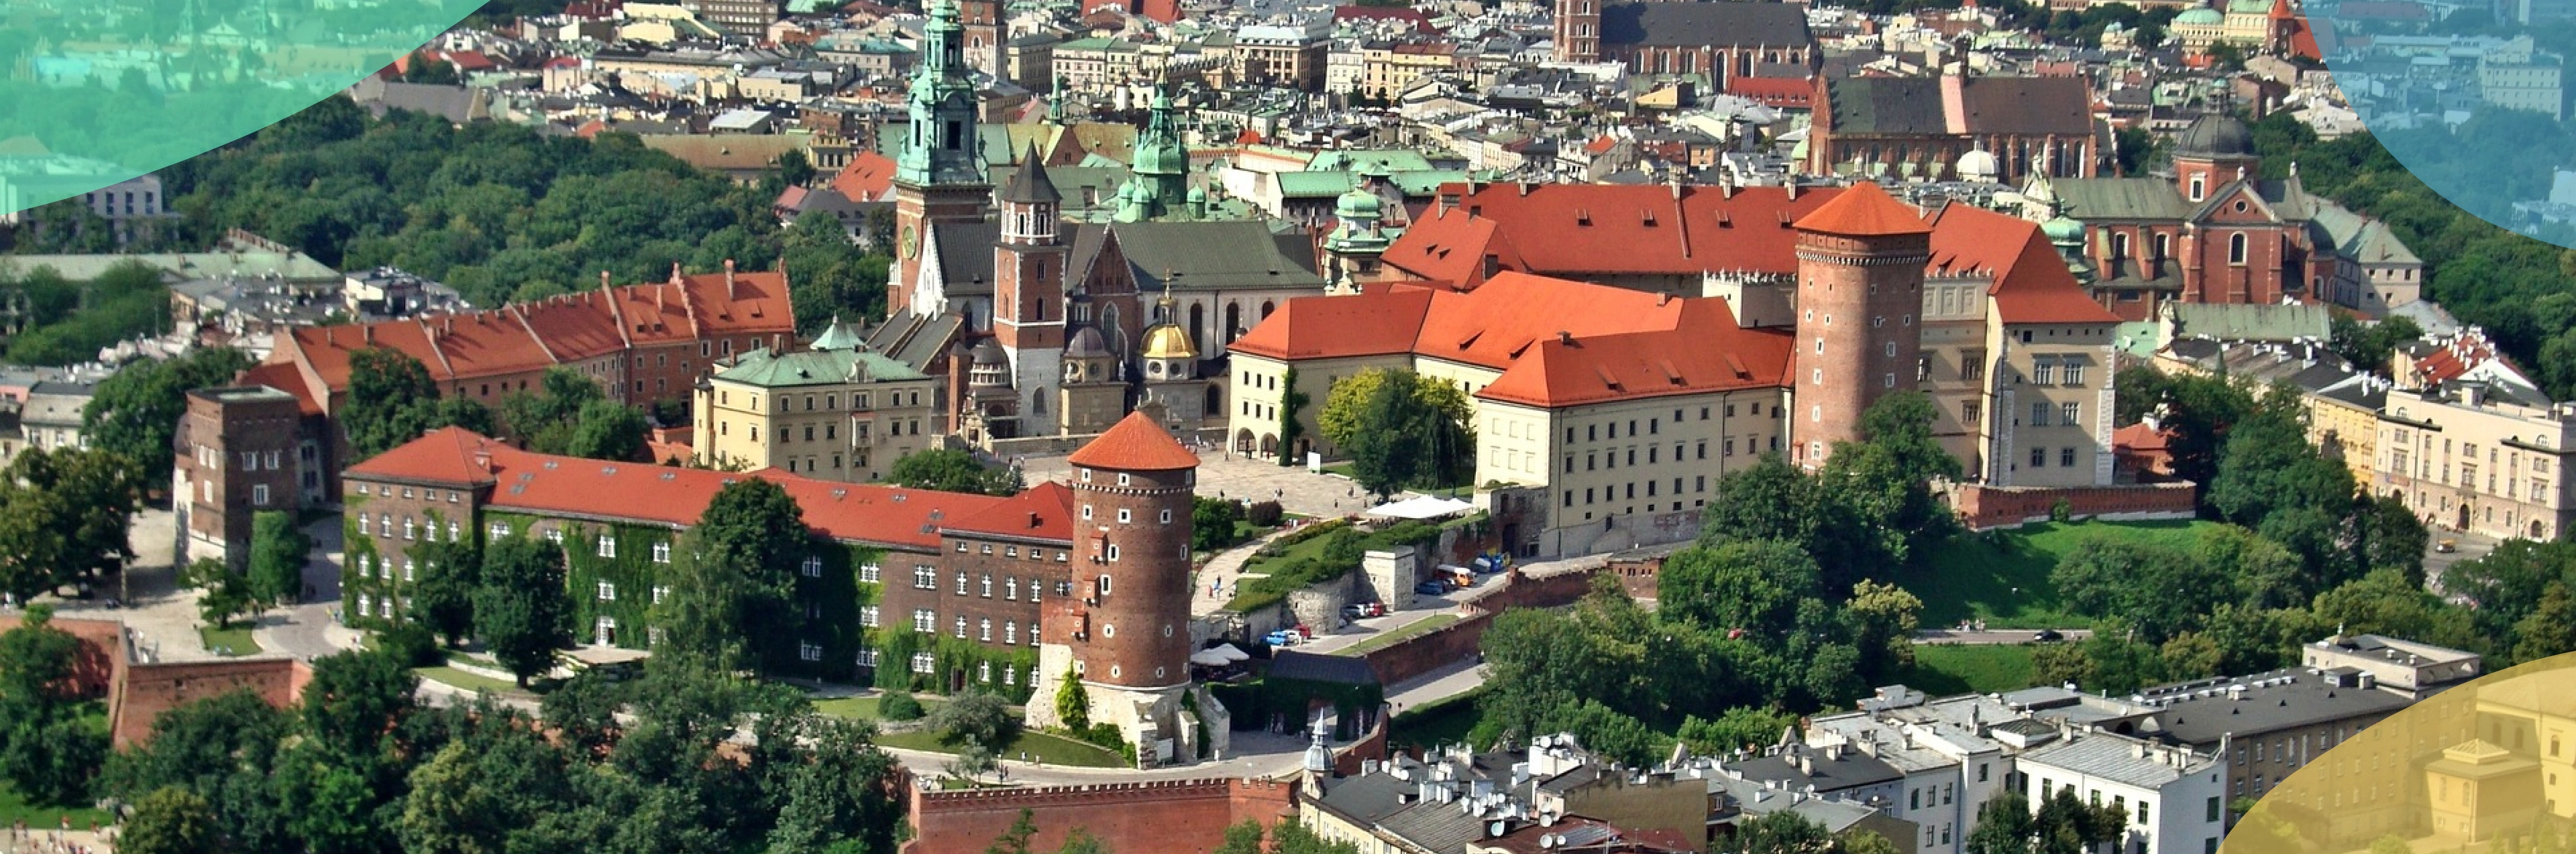 Cracow; a view on Wawel Castle